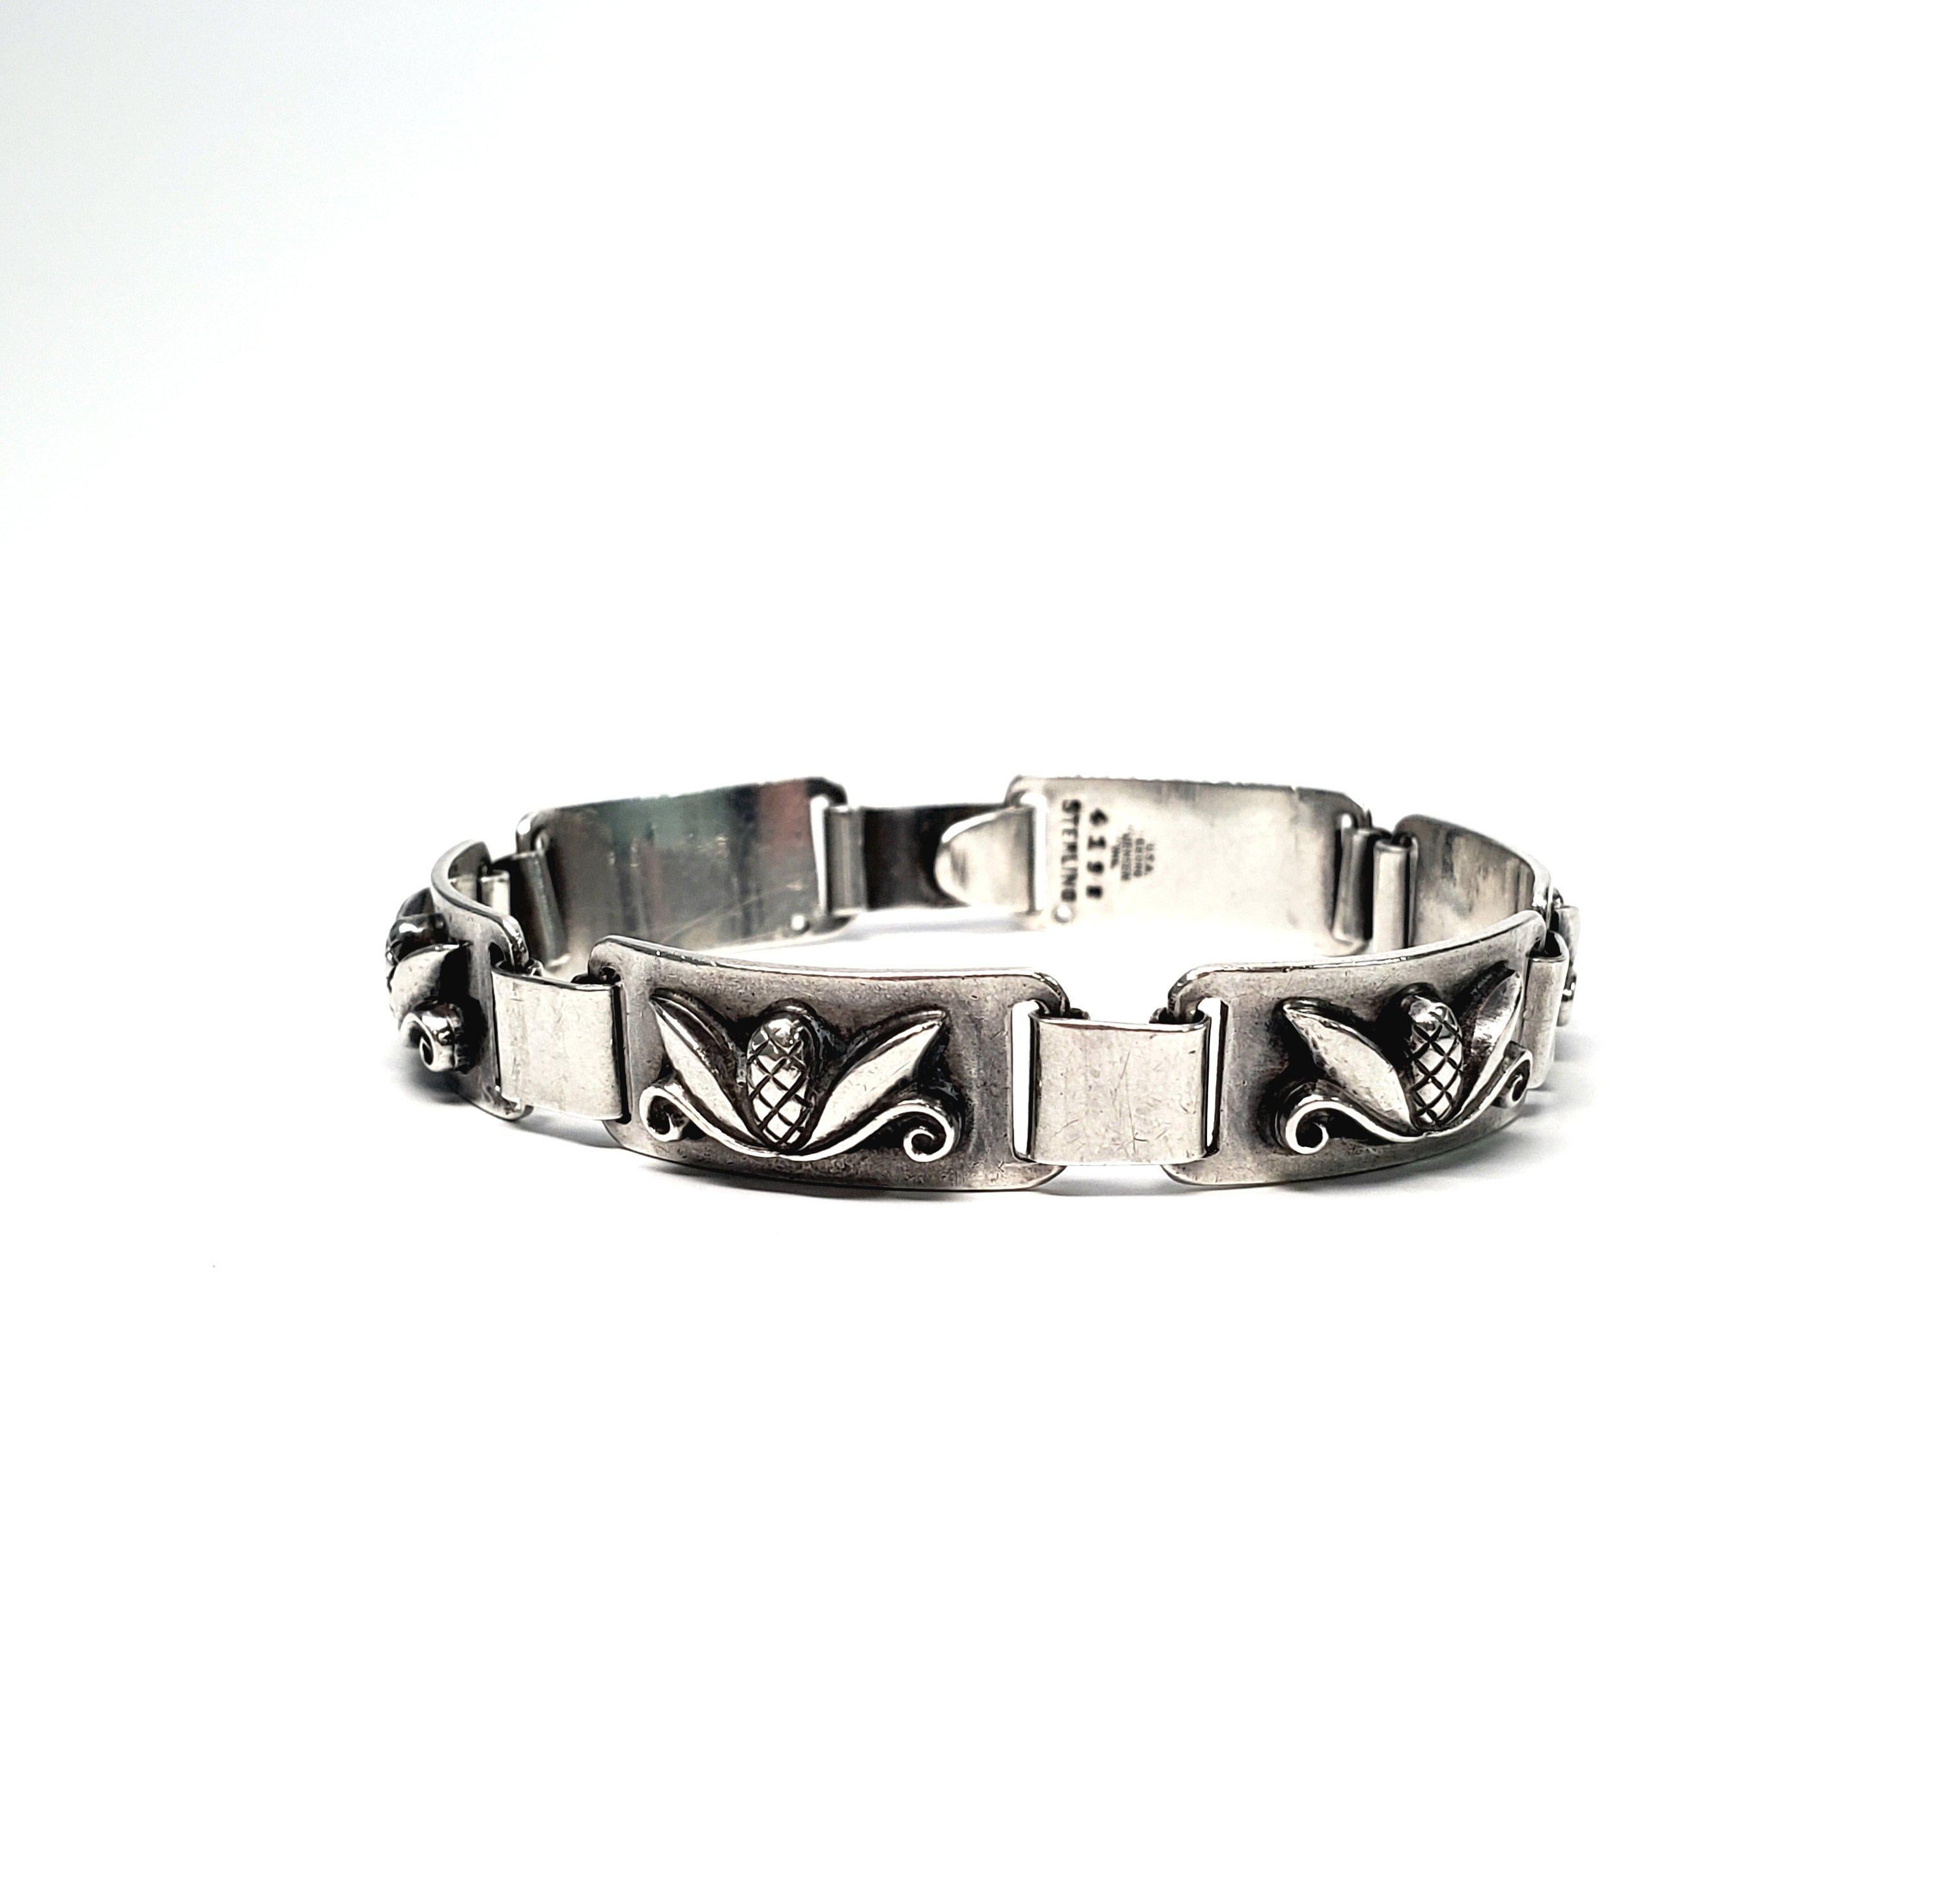 Vintage Laurence Foss for Georg Jensen Inc. USA sterling silver pine cone link bracelet. A highly collectible and rare piece, circa 1950. Bracelet consists of 6 rectangular links, each with an applied pine cone motif, joined by thick loops, with a